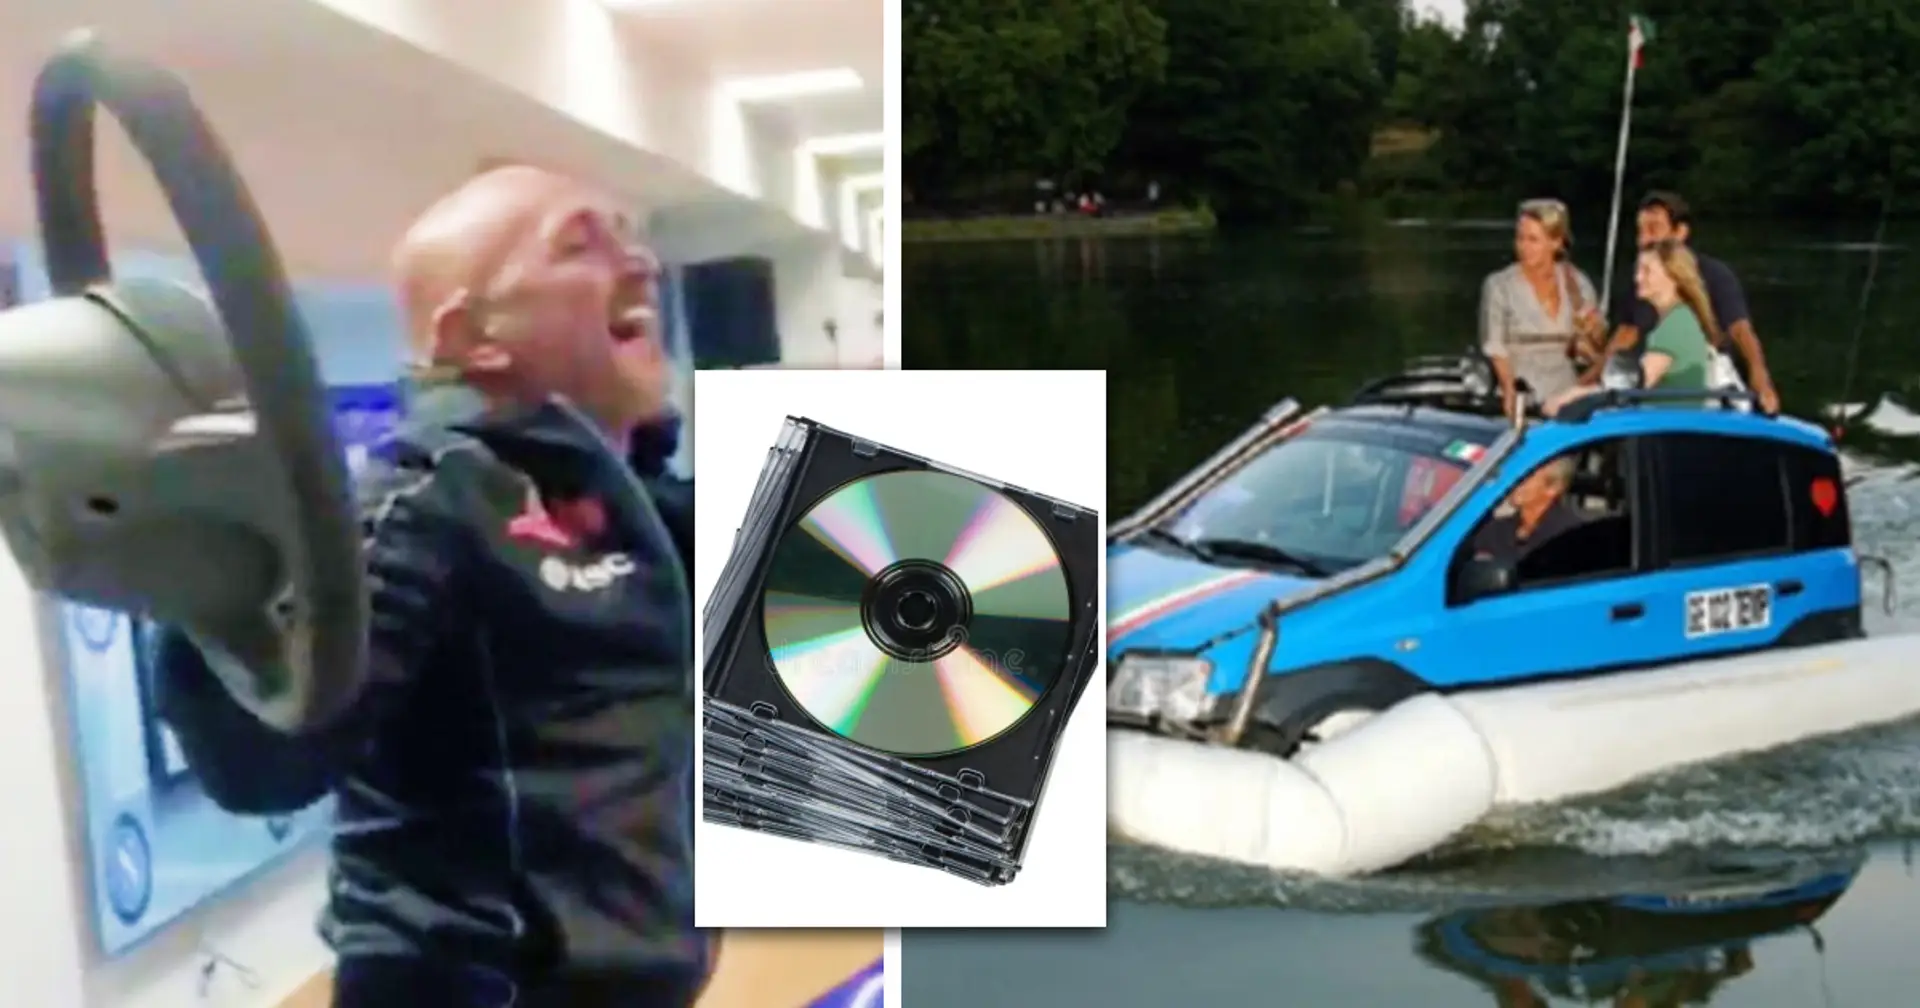 Napoli ultras gift Luciano Spalletti steering wheel and CDs they stole from his Fiat Panda in 2021